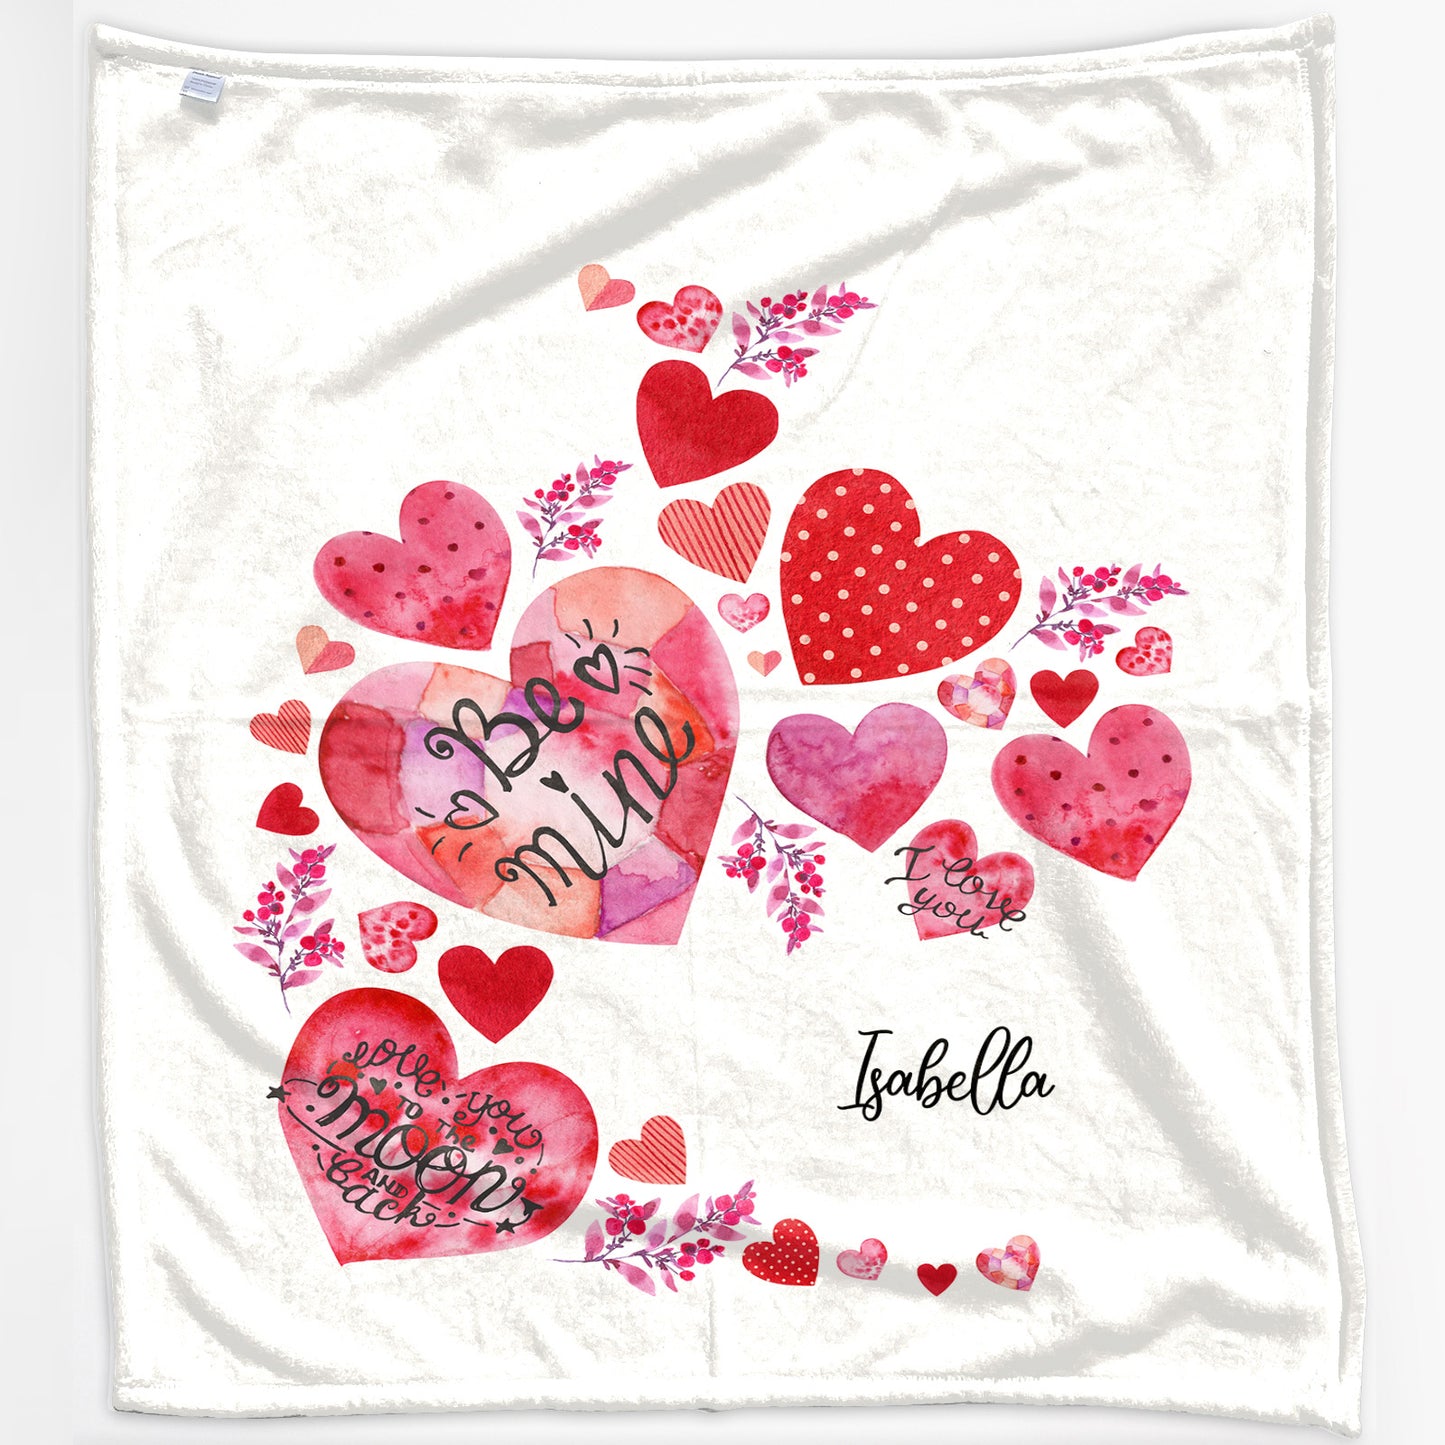 Personalised Baby Blanket with Stylish Text and Material Hearts Love Message Print